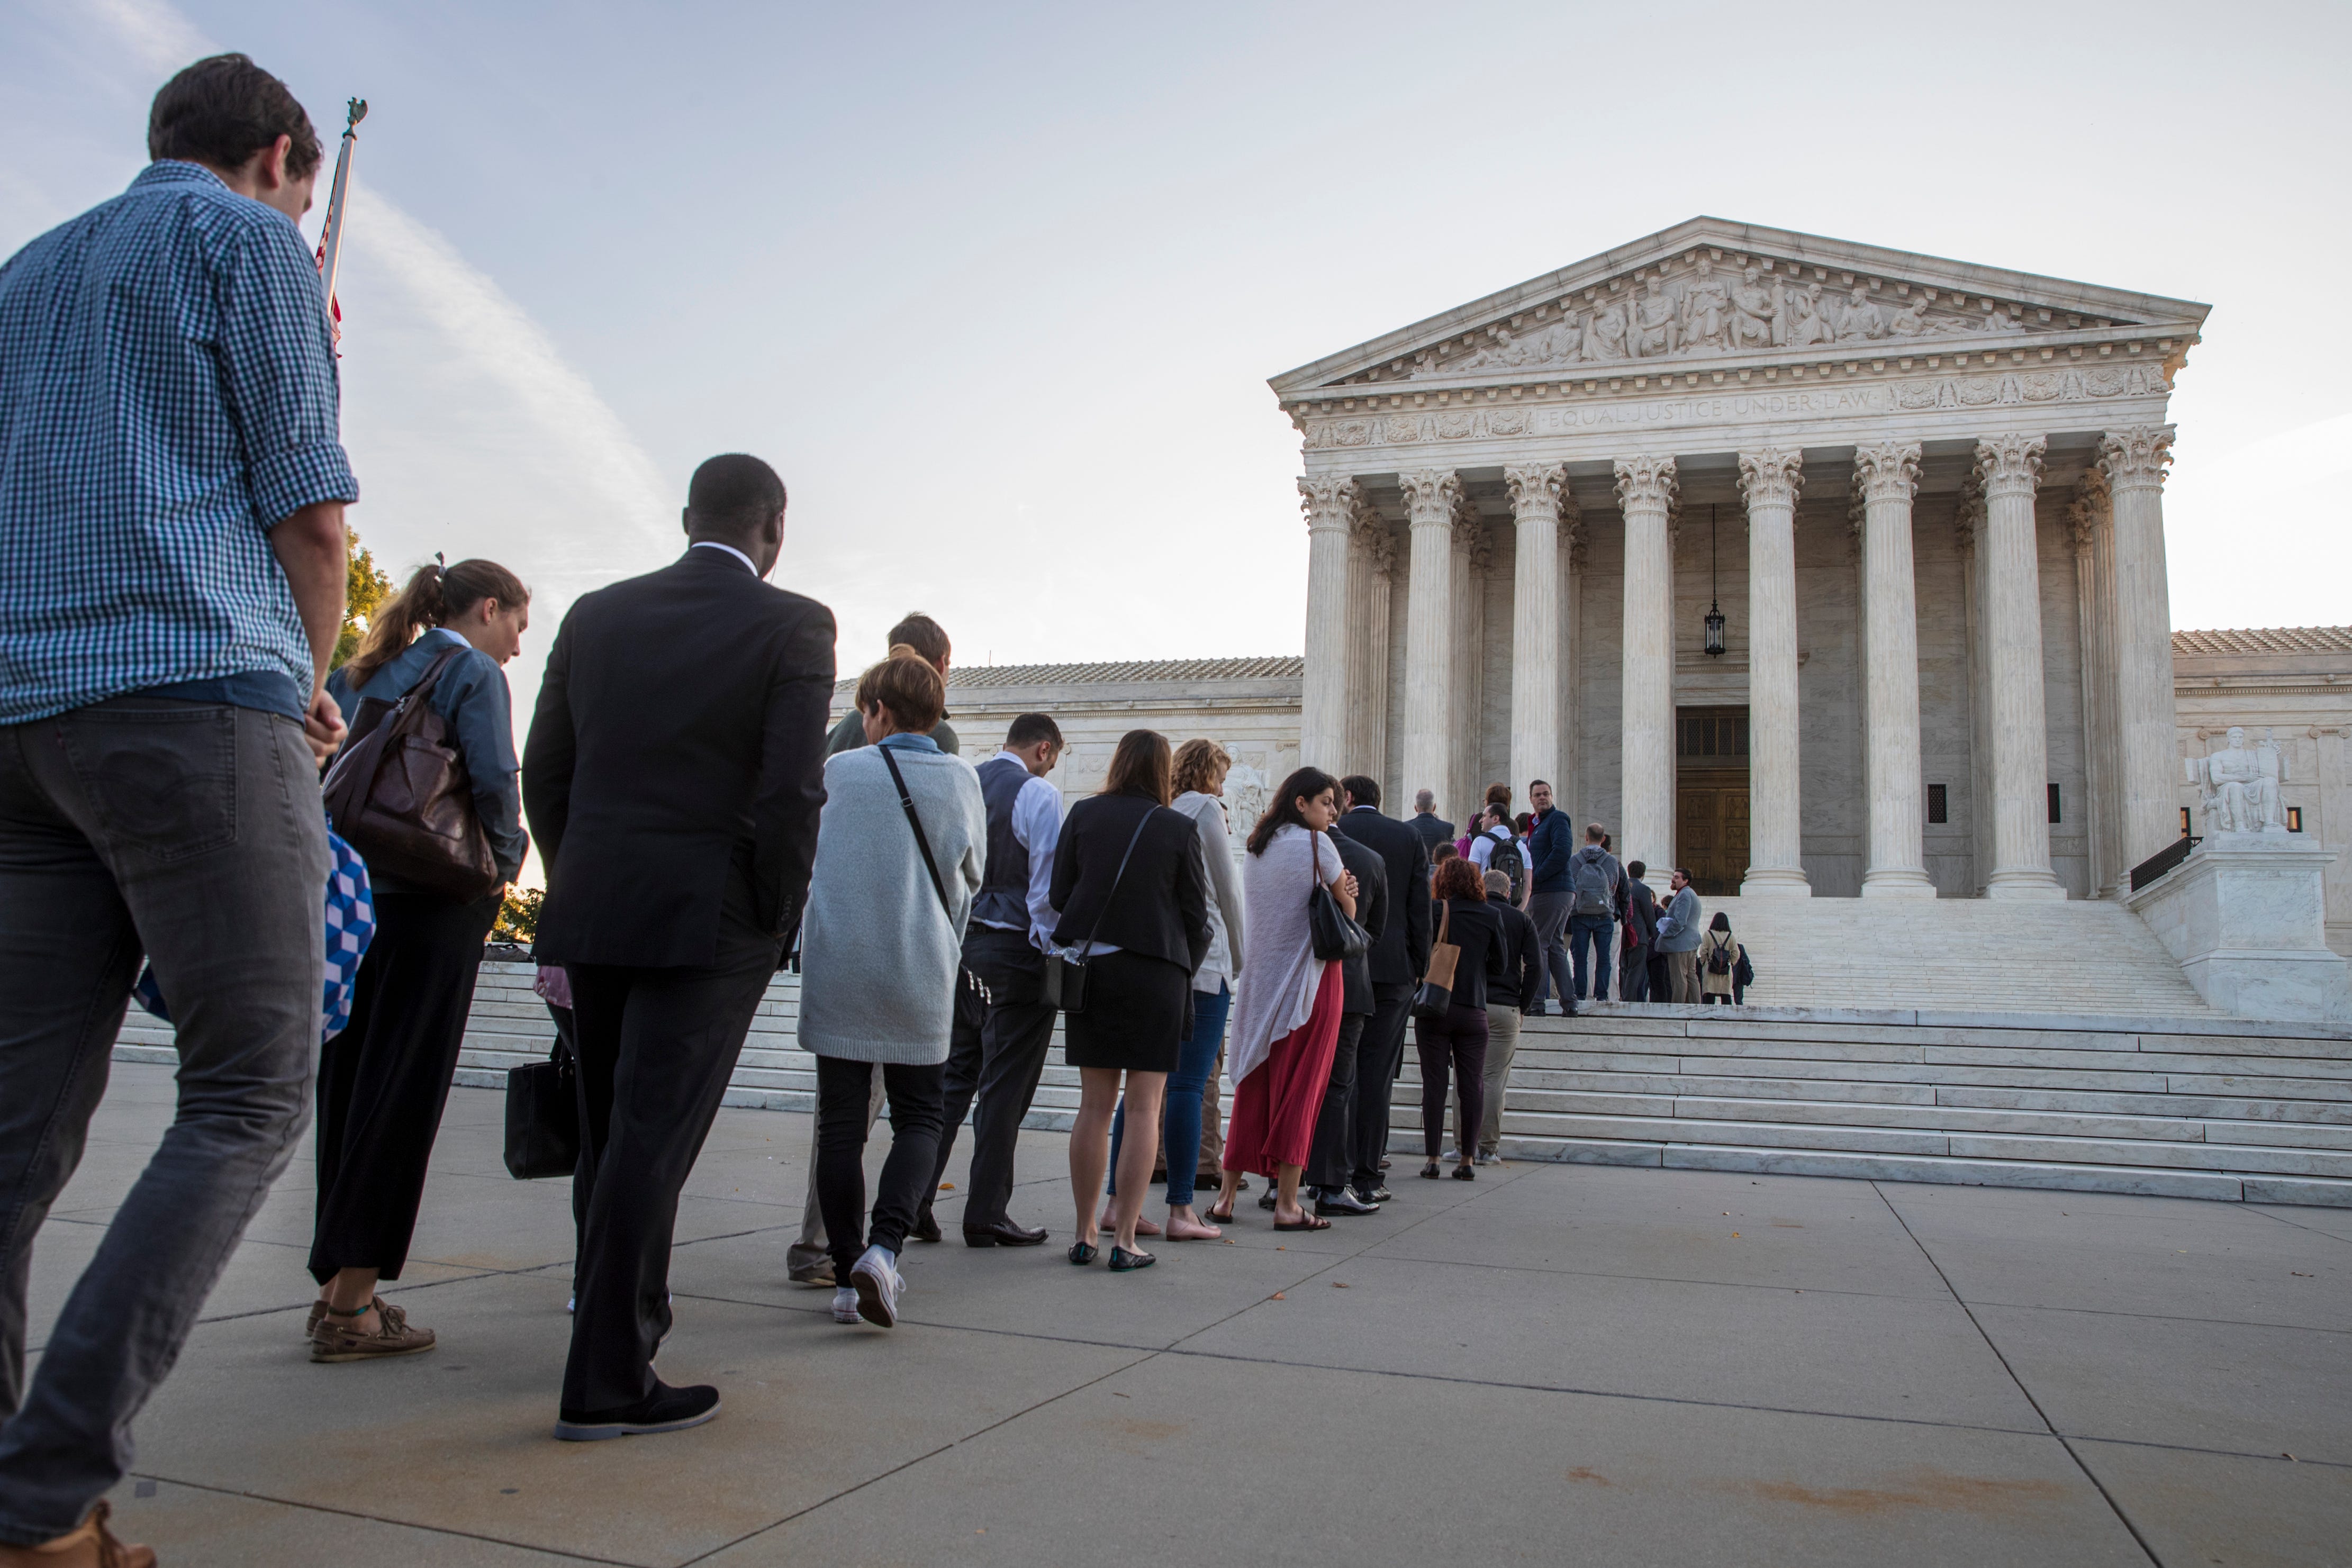 People line up at the Supreme Court on the first day of the new term, on Capitol Hill in Washington, Oct. 1, 2018. Amid the political chaos of Judge Brett Kavanaugh's nomination, the high court's work begins with only eight justices on the bench, fou